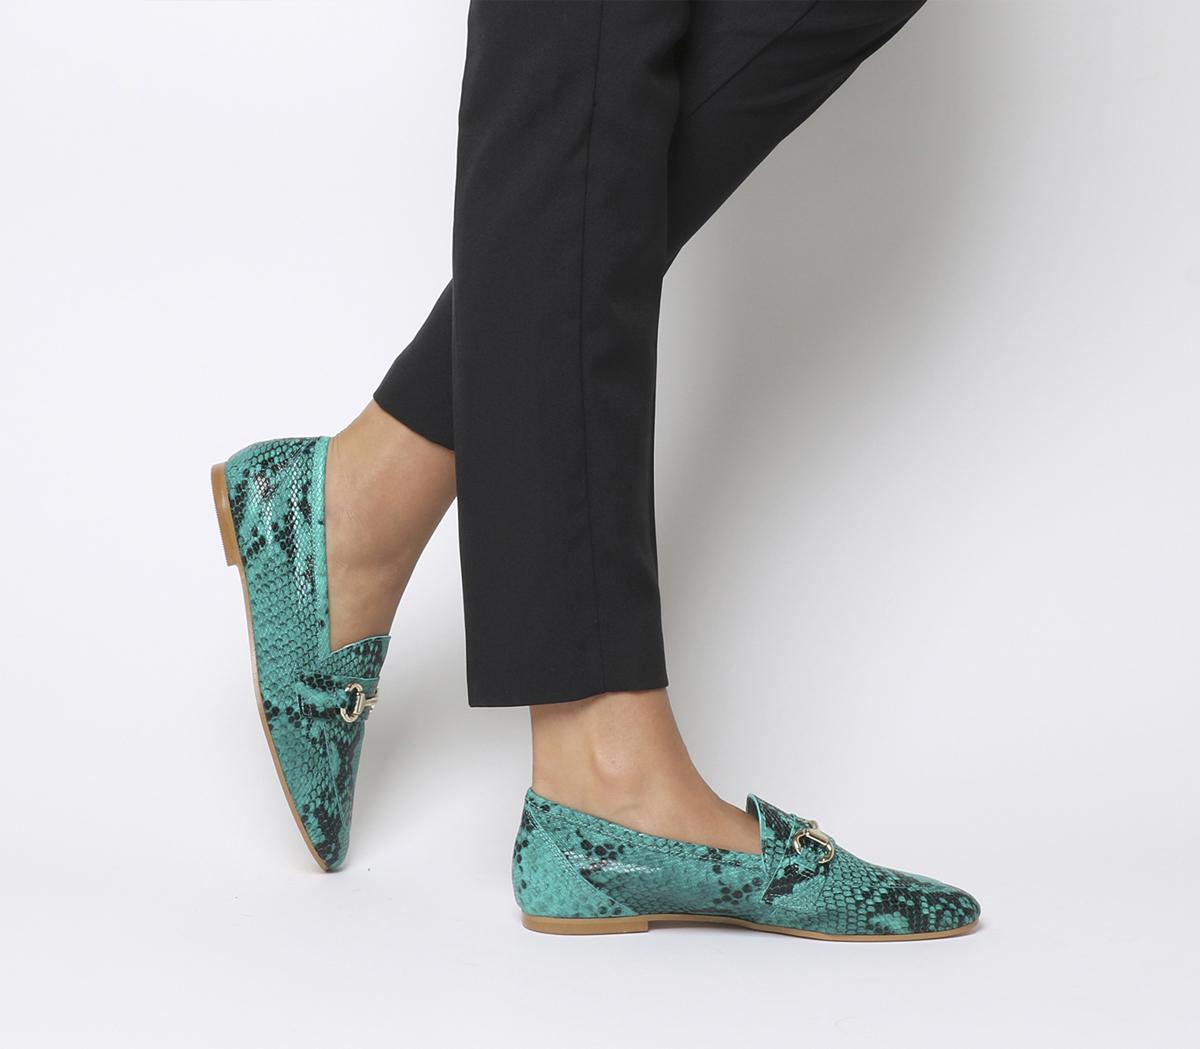 OFFICEDestiny Trim LoafersGreen Snake Leather